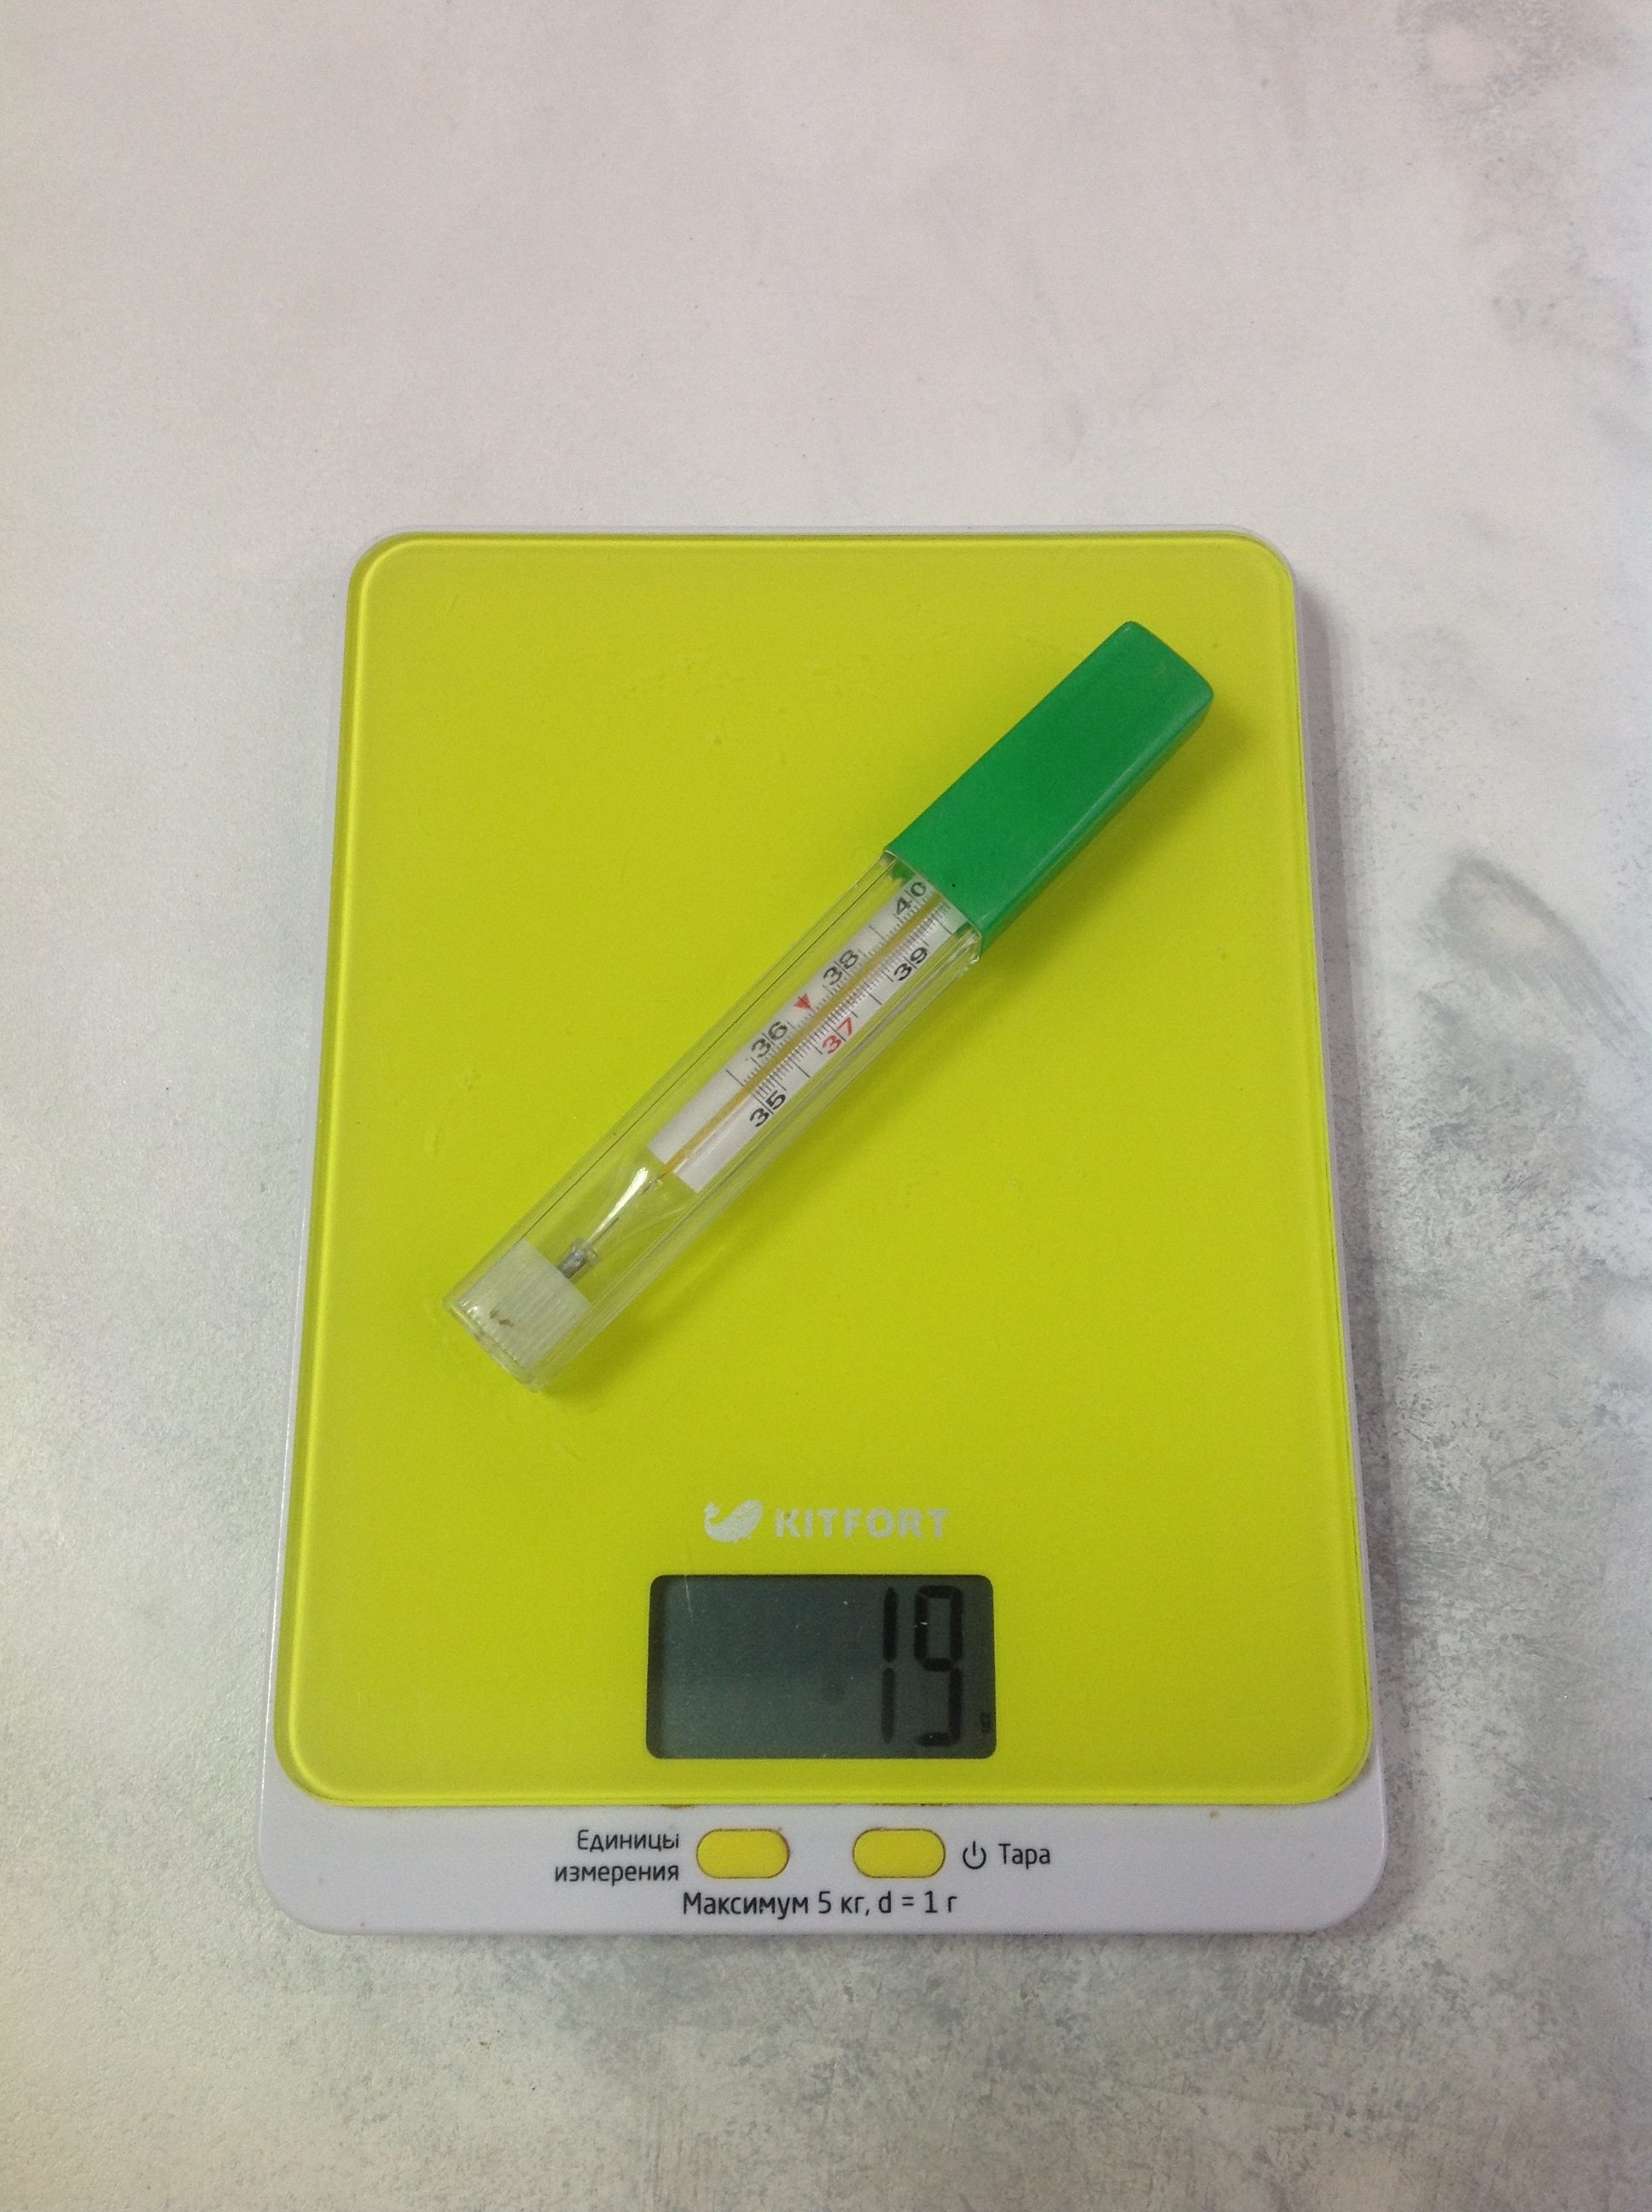 How much does a mercury thermometer (thermometer) weigh in a holder?